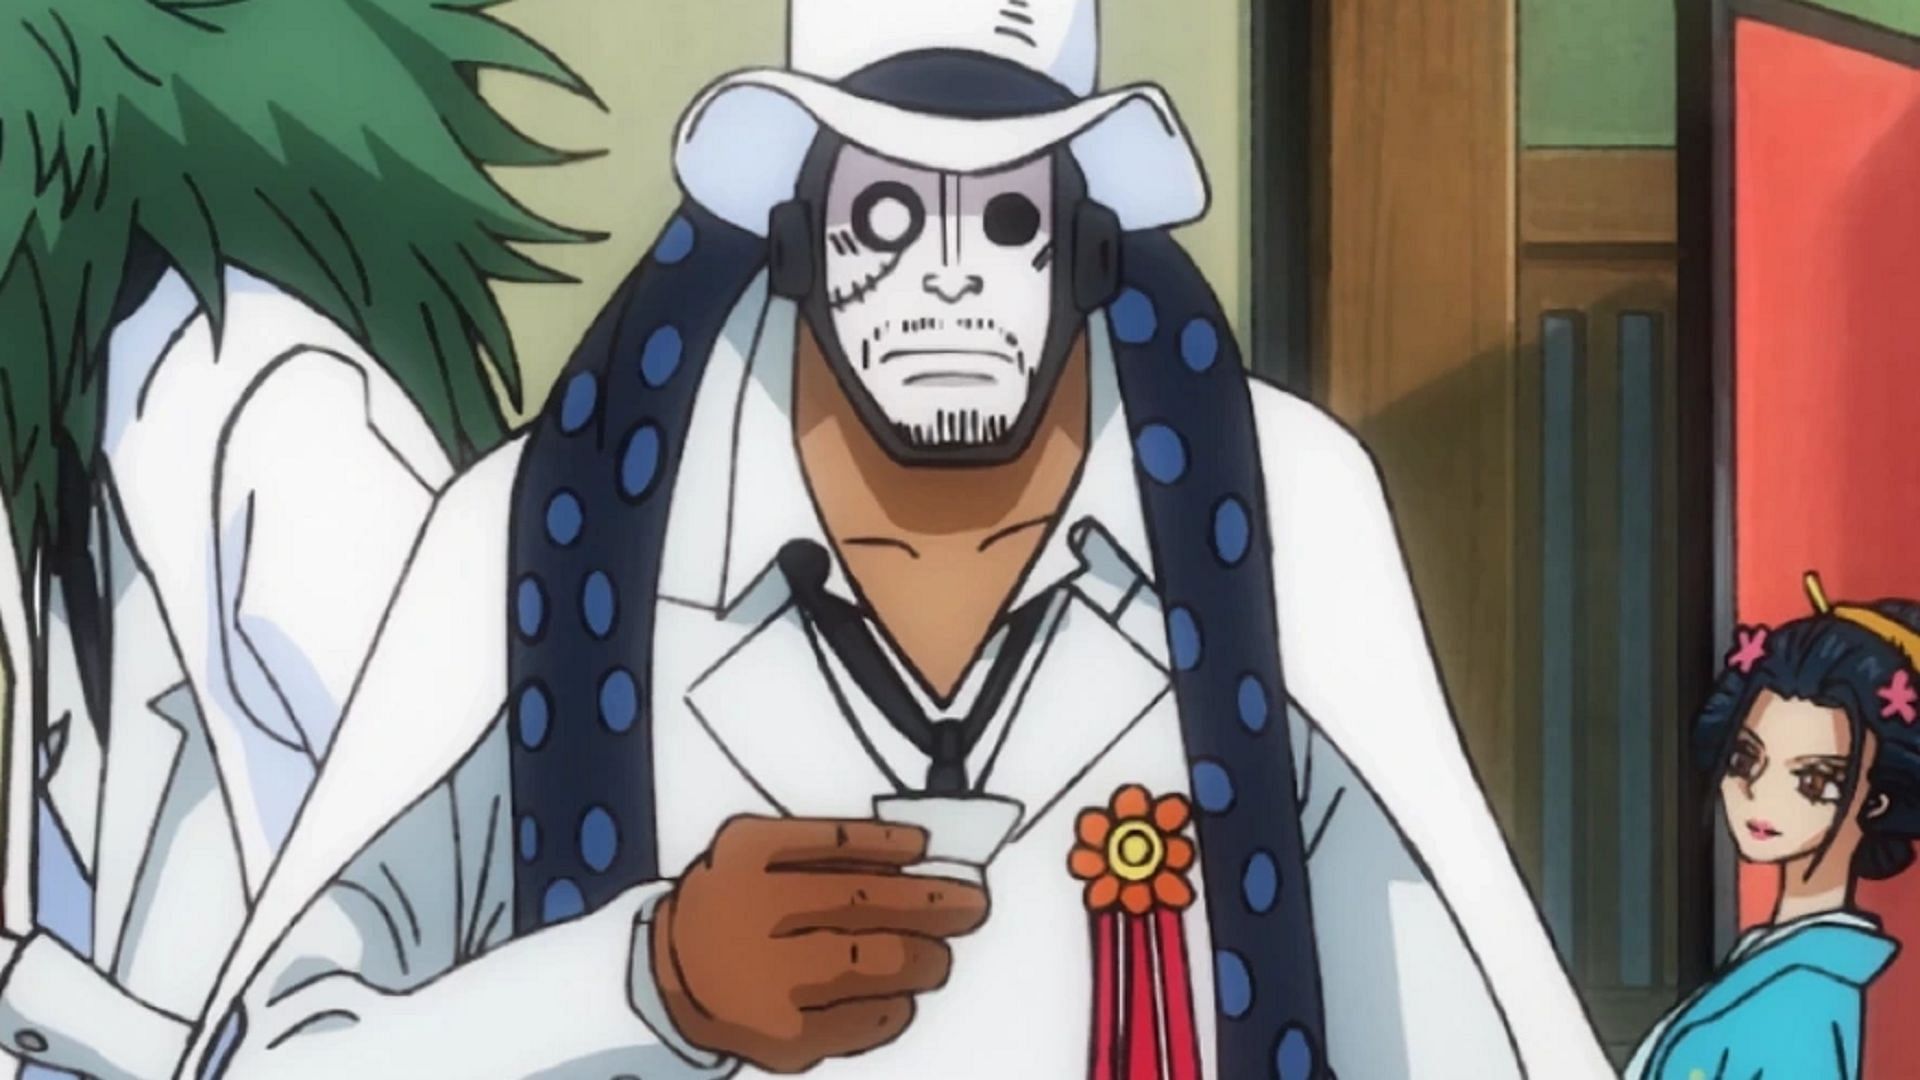 Guernica is a CP0 agent who was highlighted during the Wano Arc (Image via Toei Animation, One Piece)